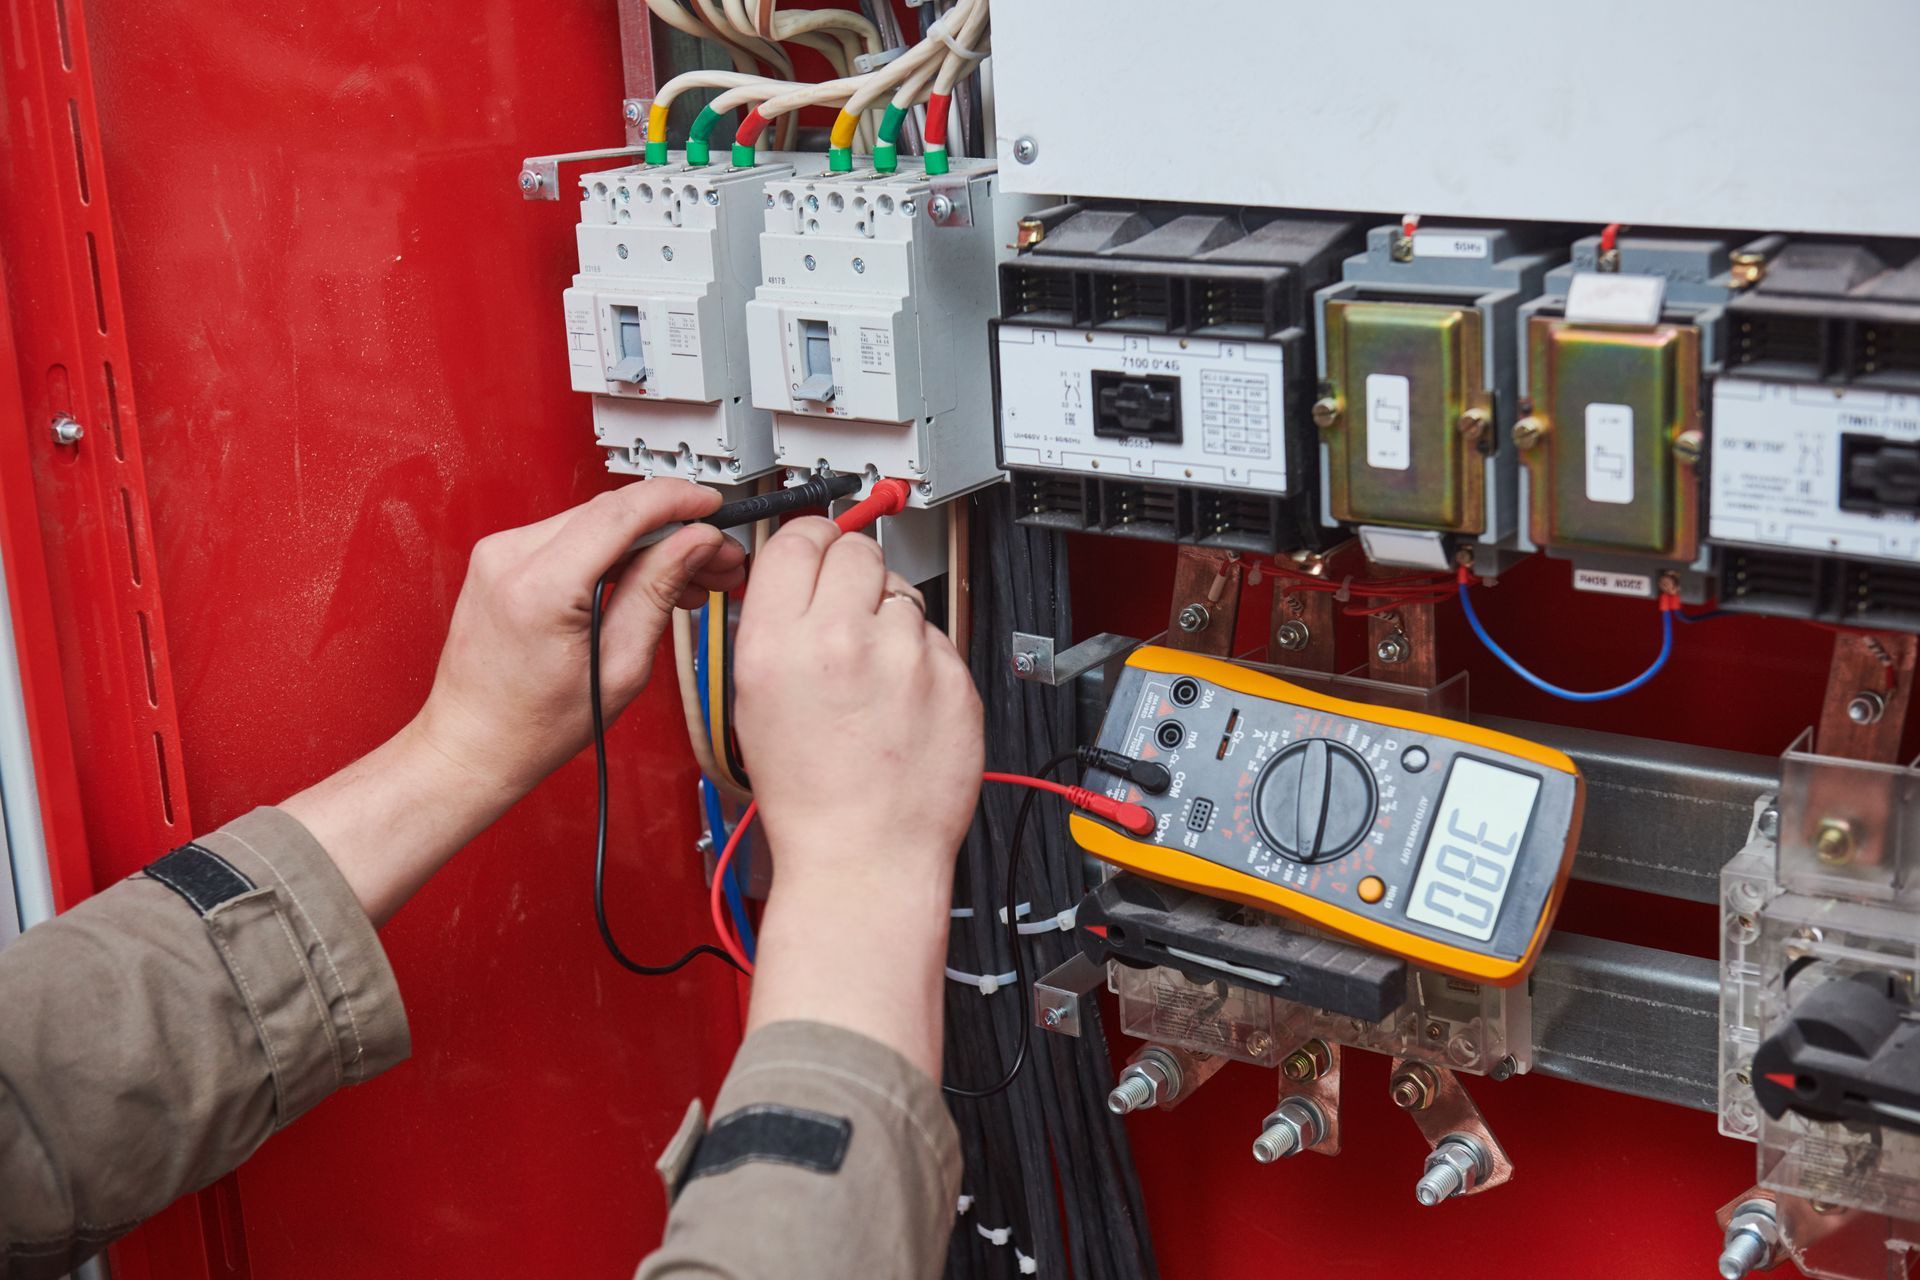 Electrician using a multimeter tester to measure voltage in a control panel.